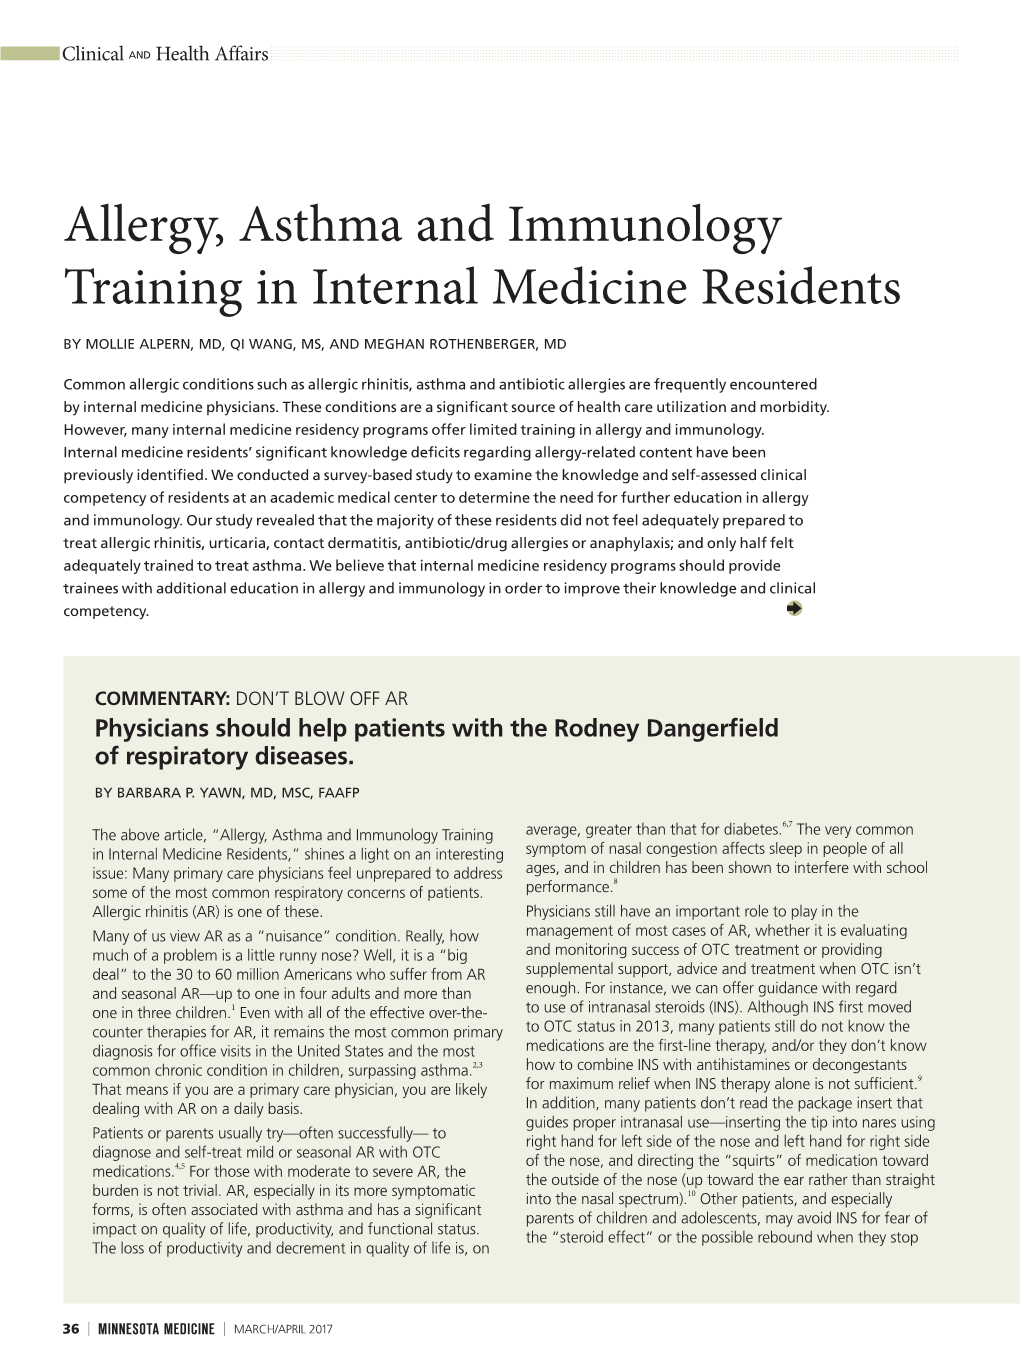 Allergy, Asthma and Immunology Training in Internal Medicine Residents